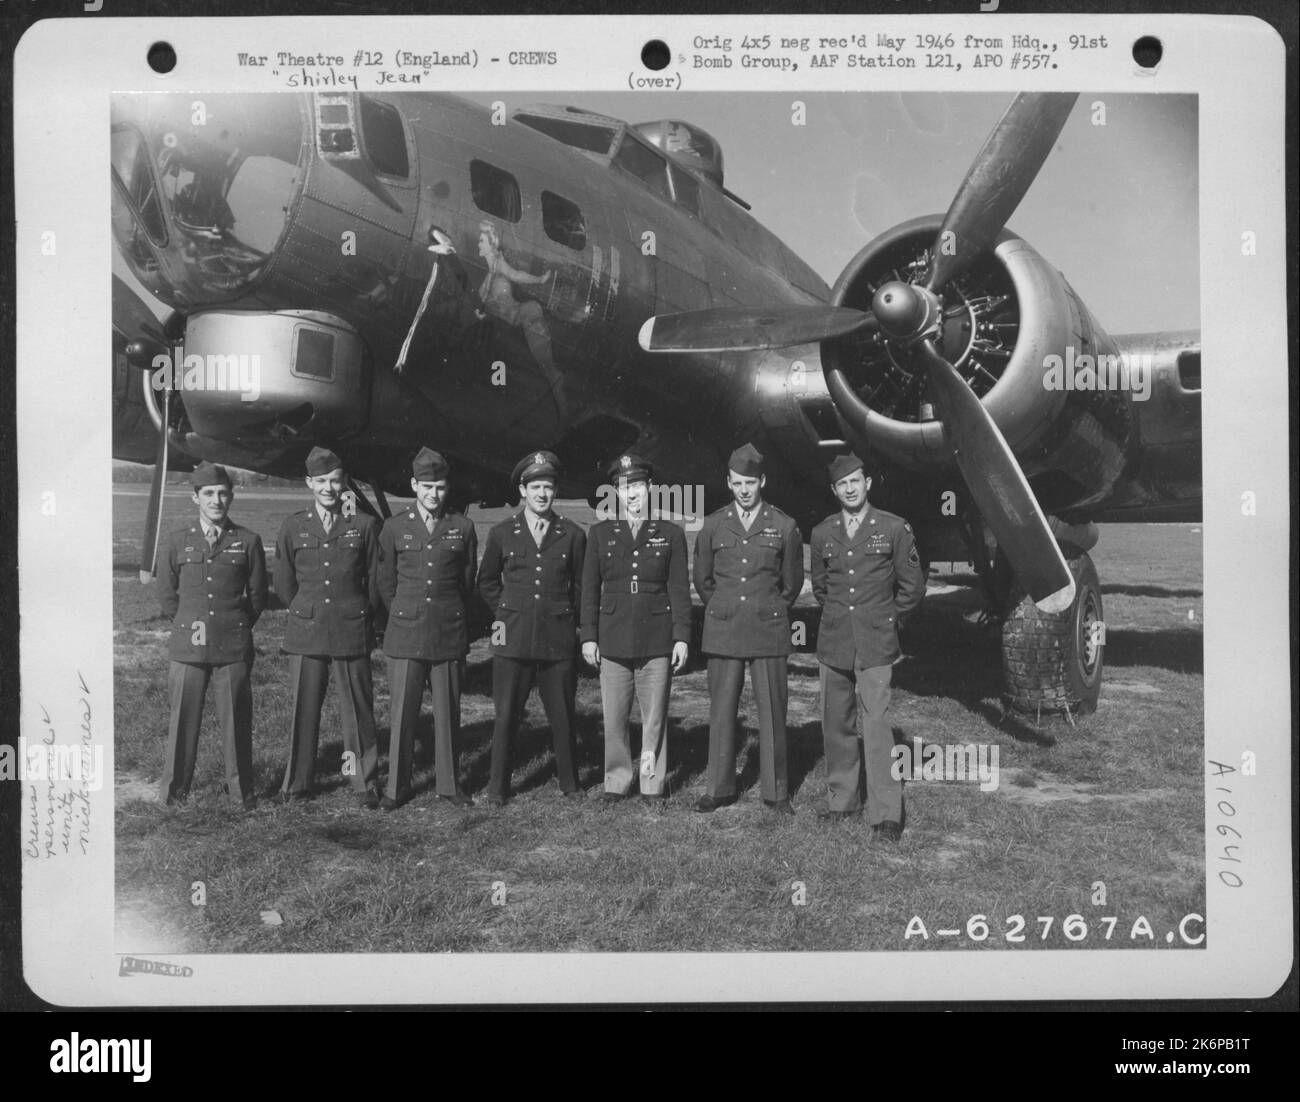 Lt. C.C. Wallace And Crew Of The 324Th Bomb Sq., 91St Bomb Group, 8Th Air Force, Beside The Boeing B-17 'Flying Fortress' 'Shirley Jean'. England. Stock Photo